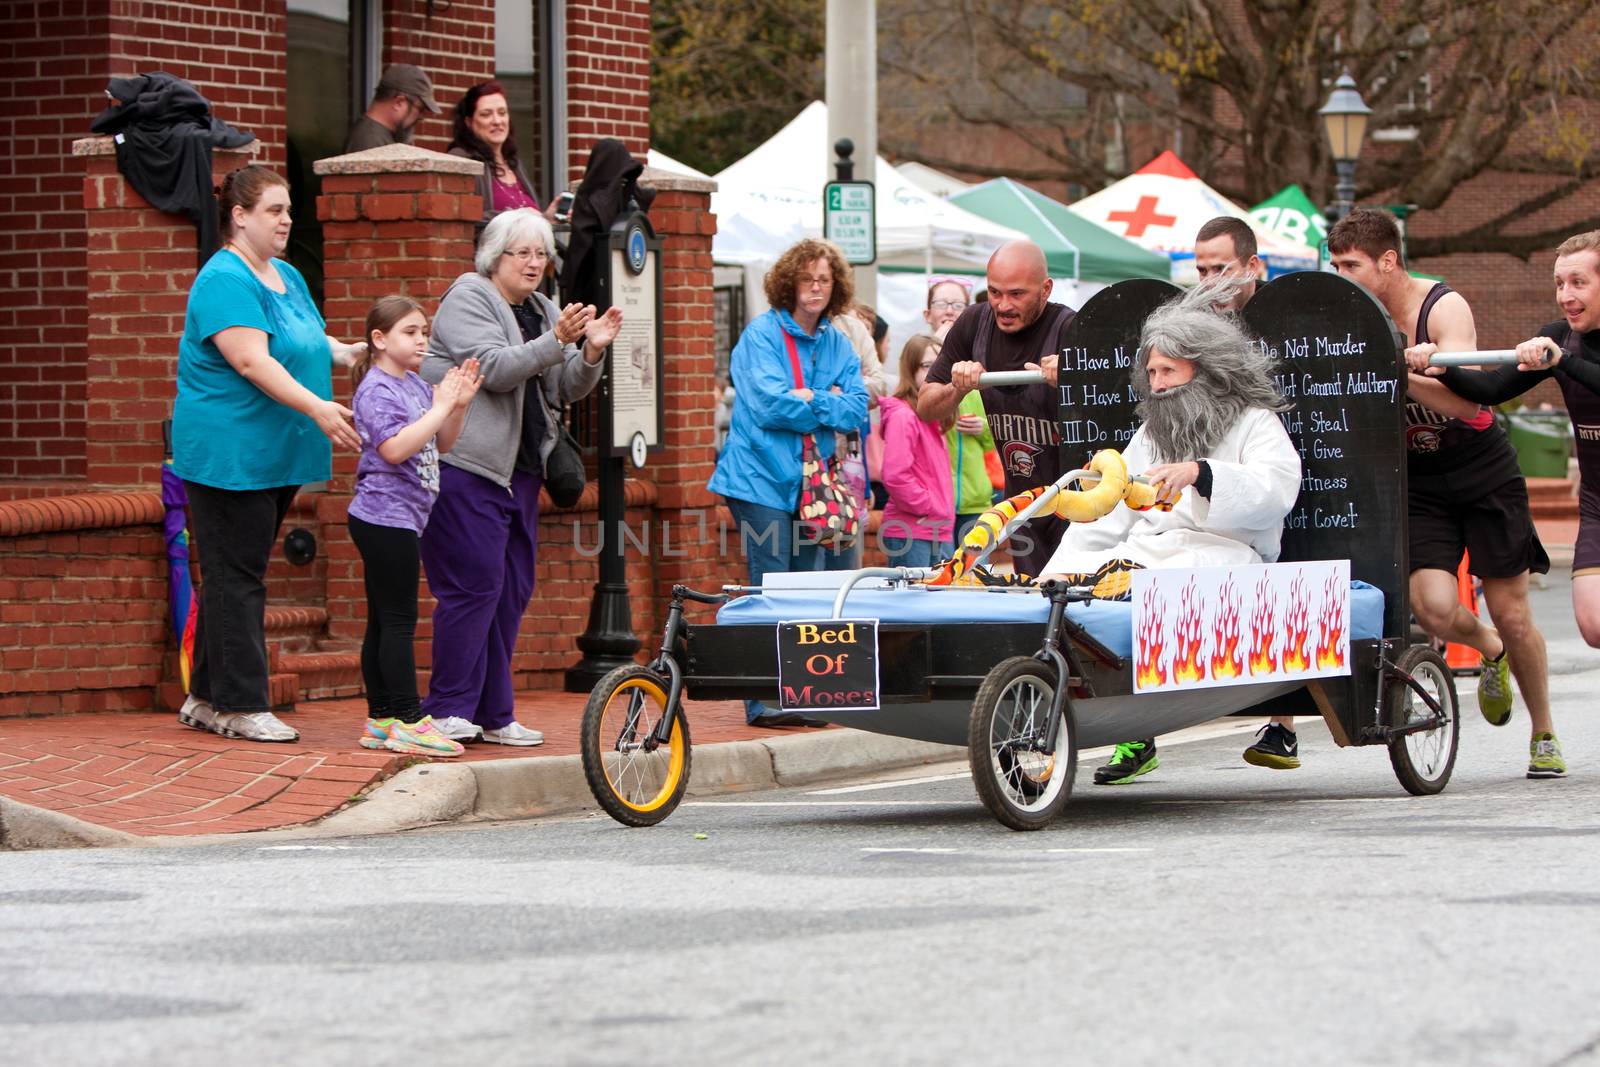 Lawrenceville, GA, USA - March 29, 2014:  A team pushes the "bed of Moses" around a corner in the annual Lawrenceville Bed Race, to benefit a local Gwinnett County homeless shelter.